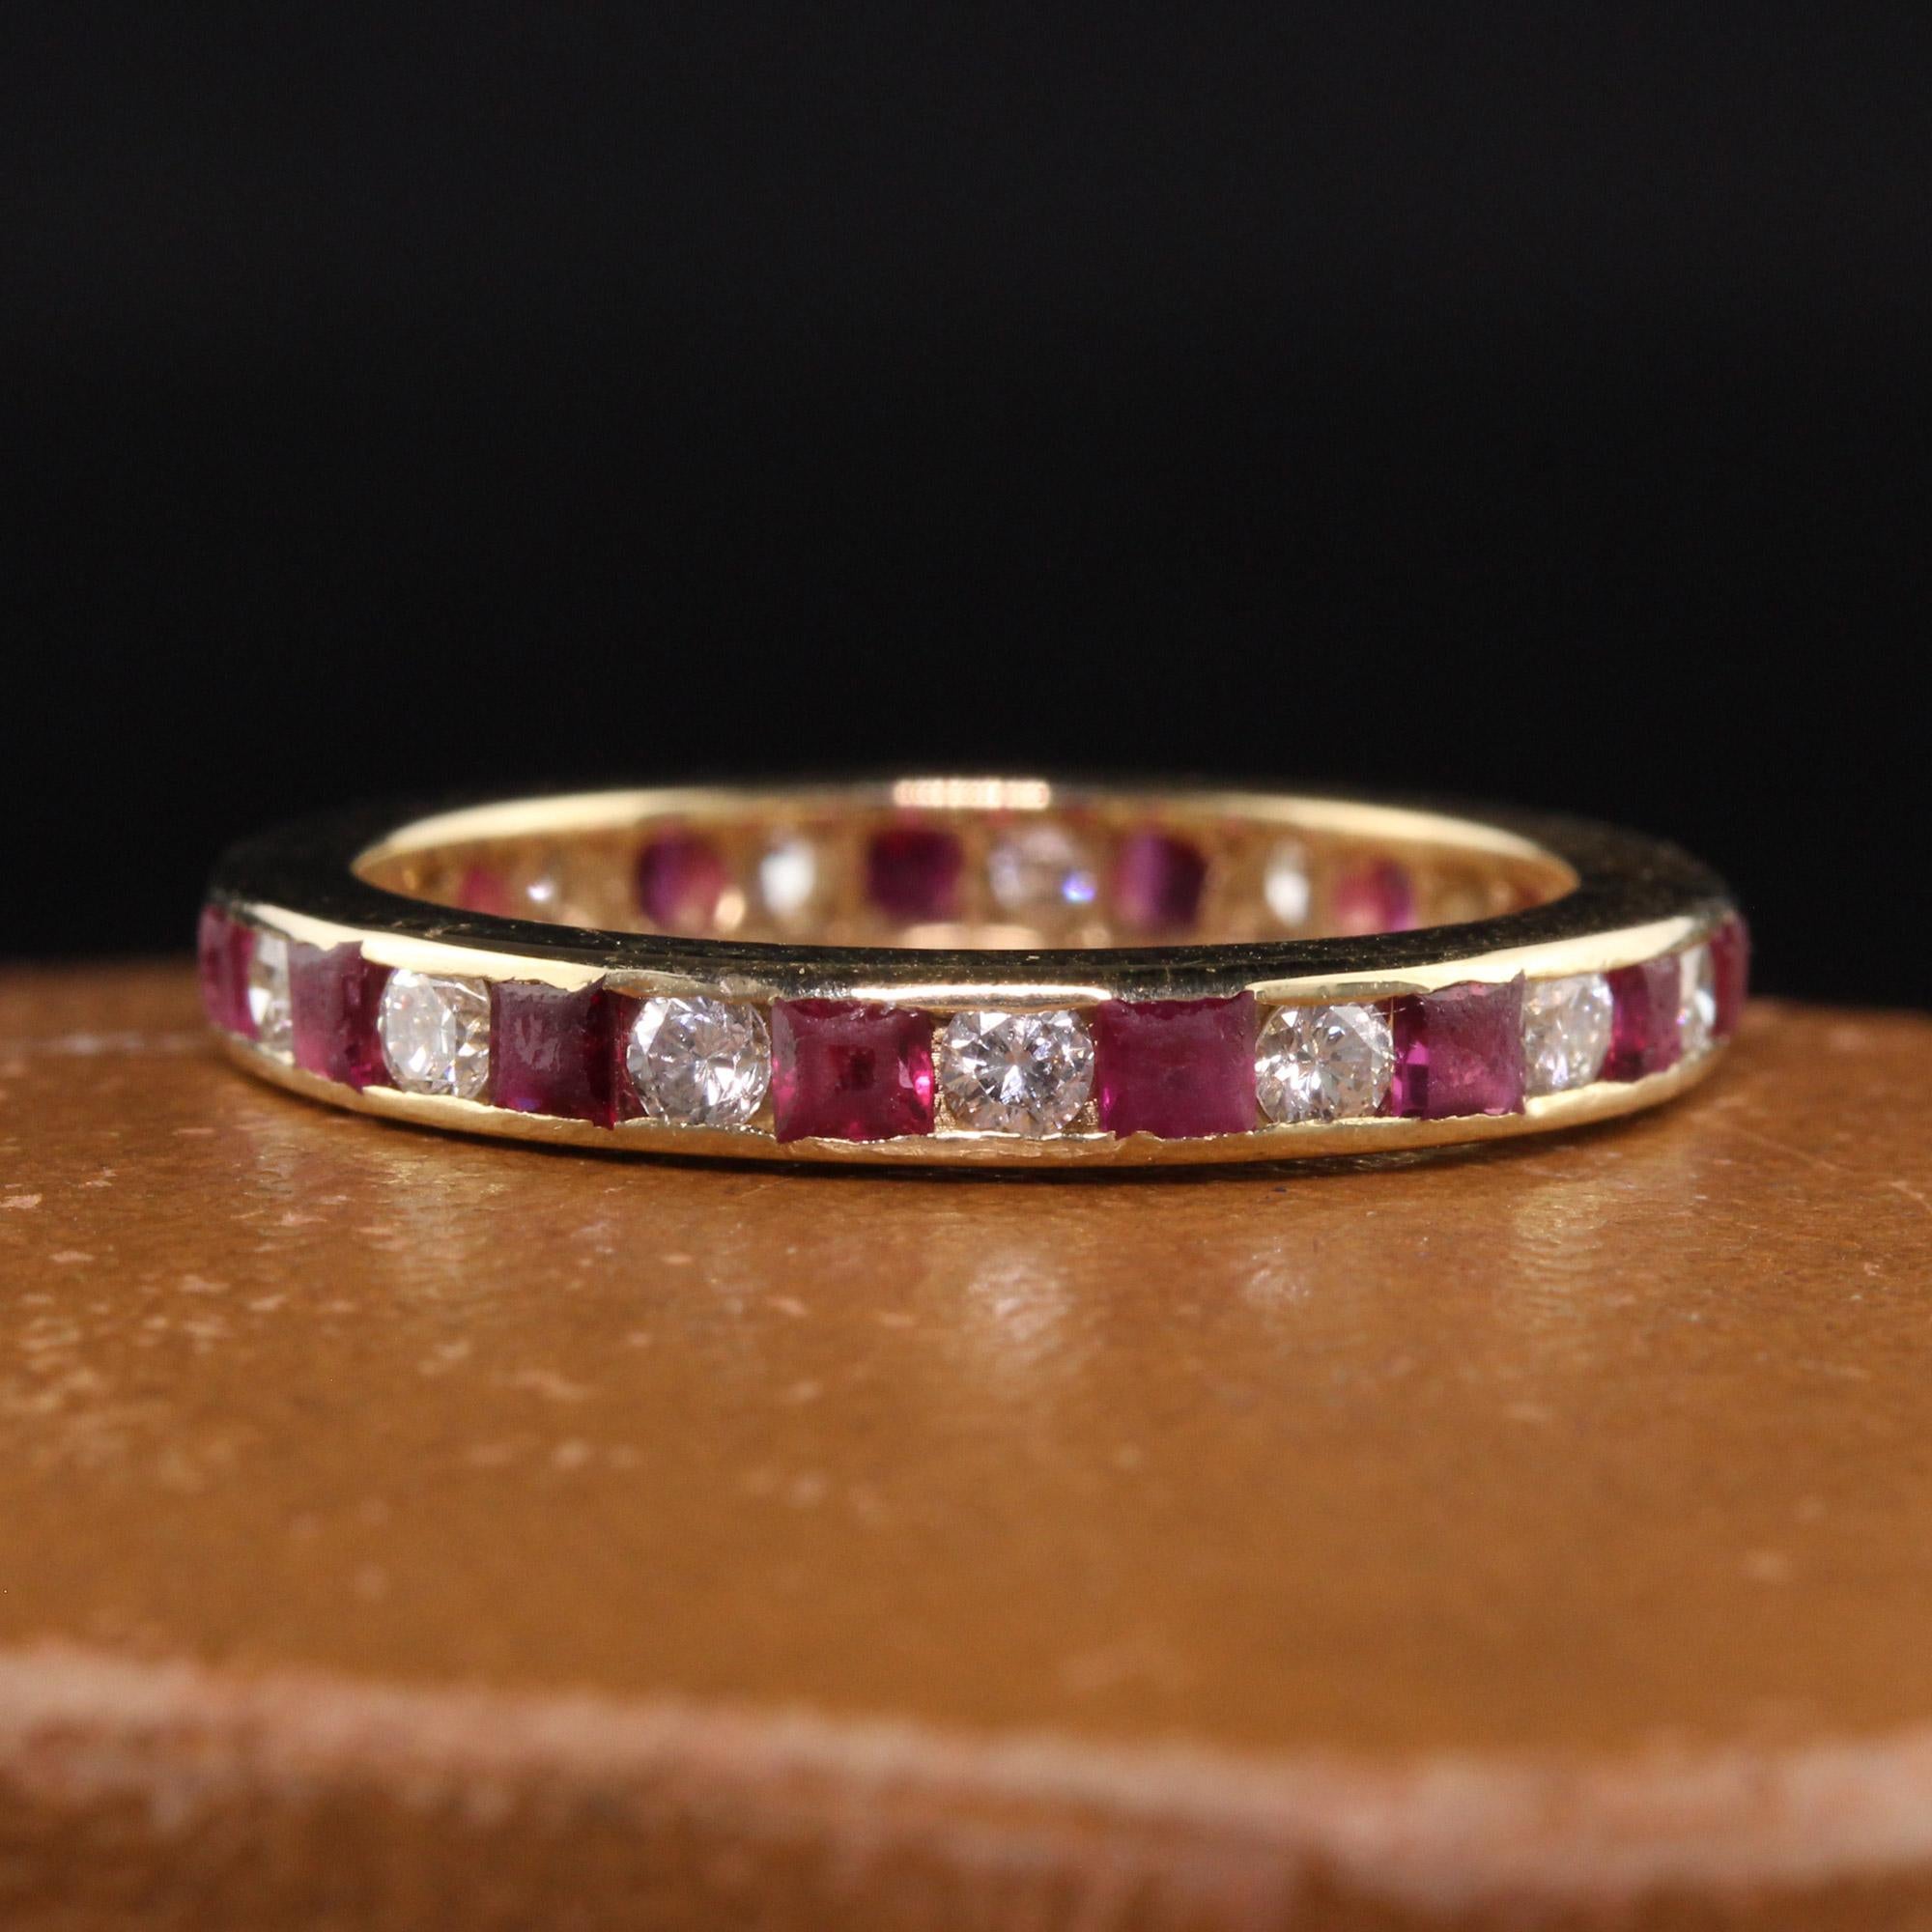 Beautiful Vintage Retro 14K Yellow Gold Diamond and Ruby Eternity Band. This beautiful band is crafted in 14k yellow gold. The band has diamonds and natural rubies alternating around the entire ring. The rubies of the ring are abraded due to normal